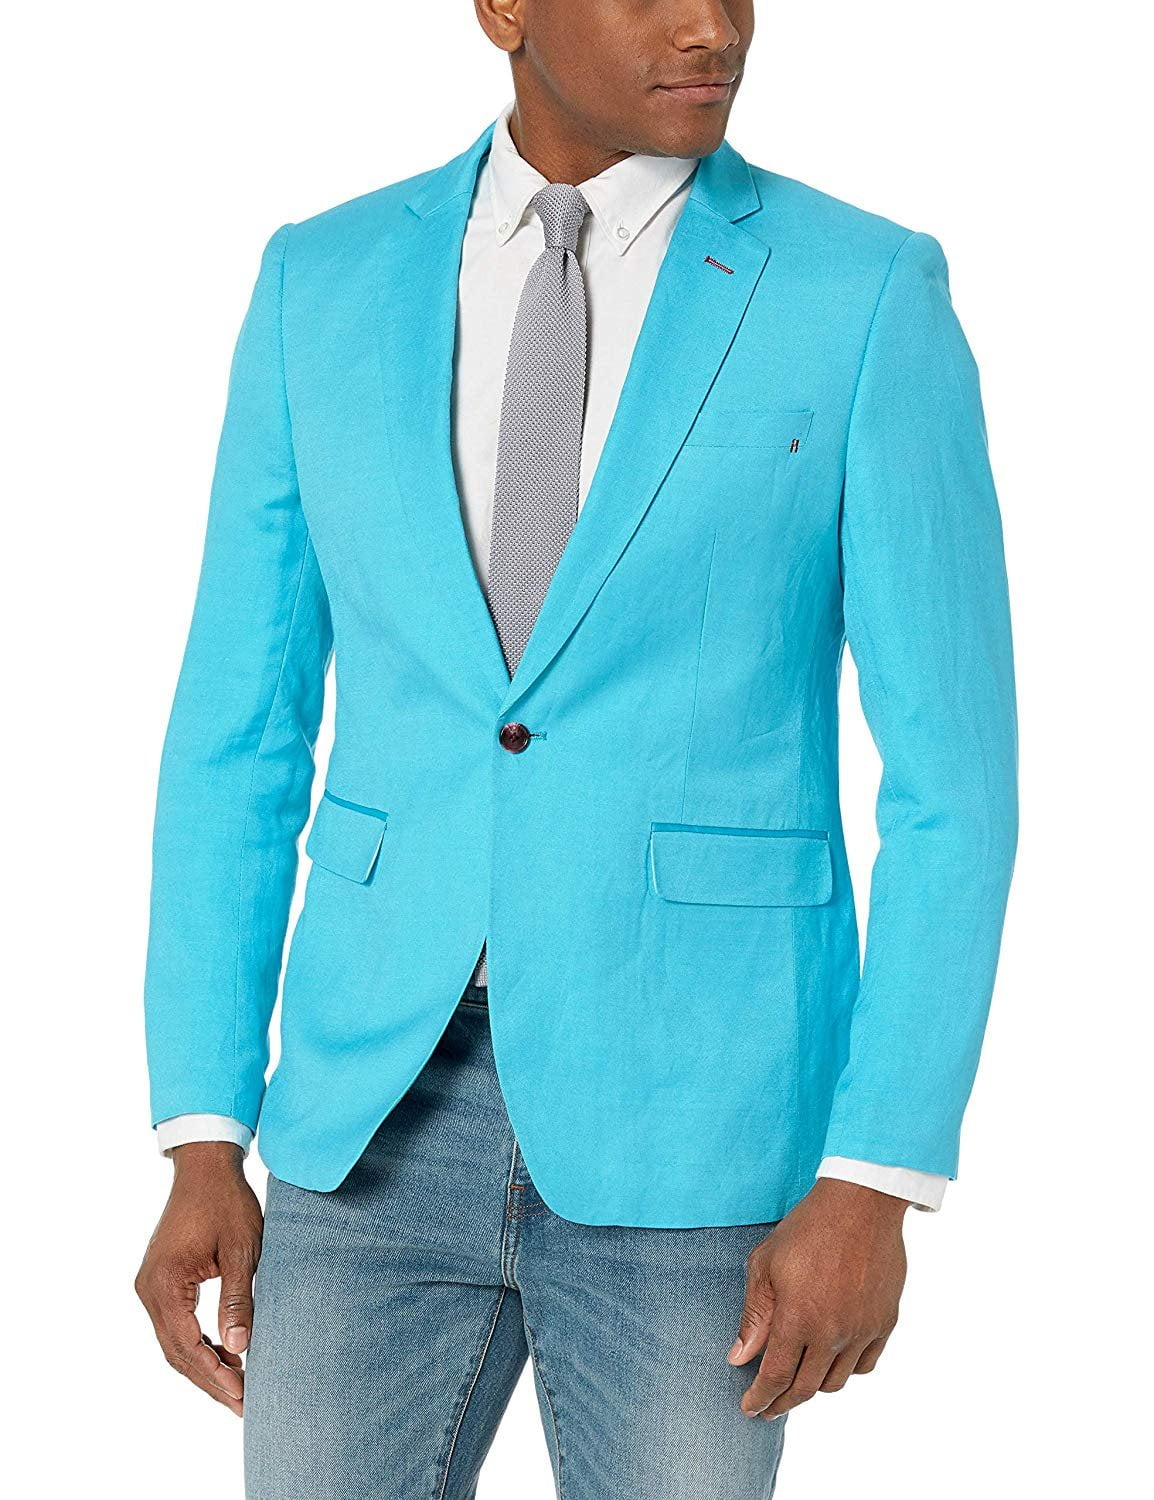 Fashion Jackets Sports Jackets G-Star Sports Jacket turquoise casual look 